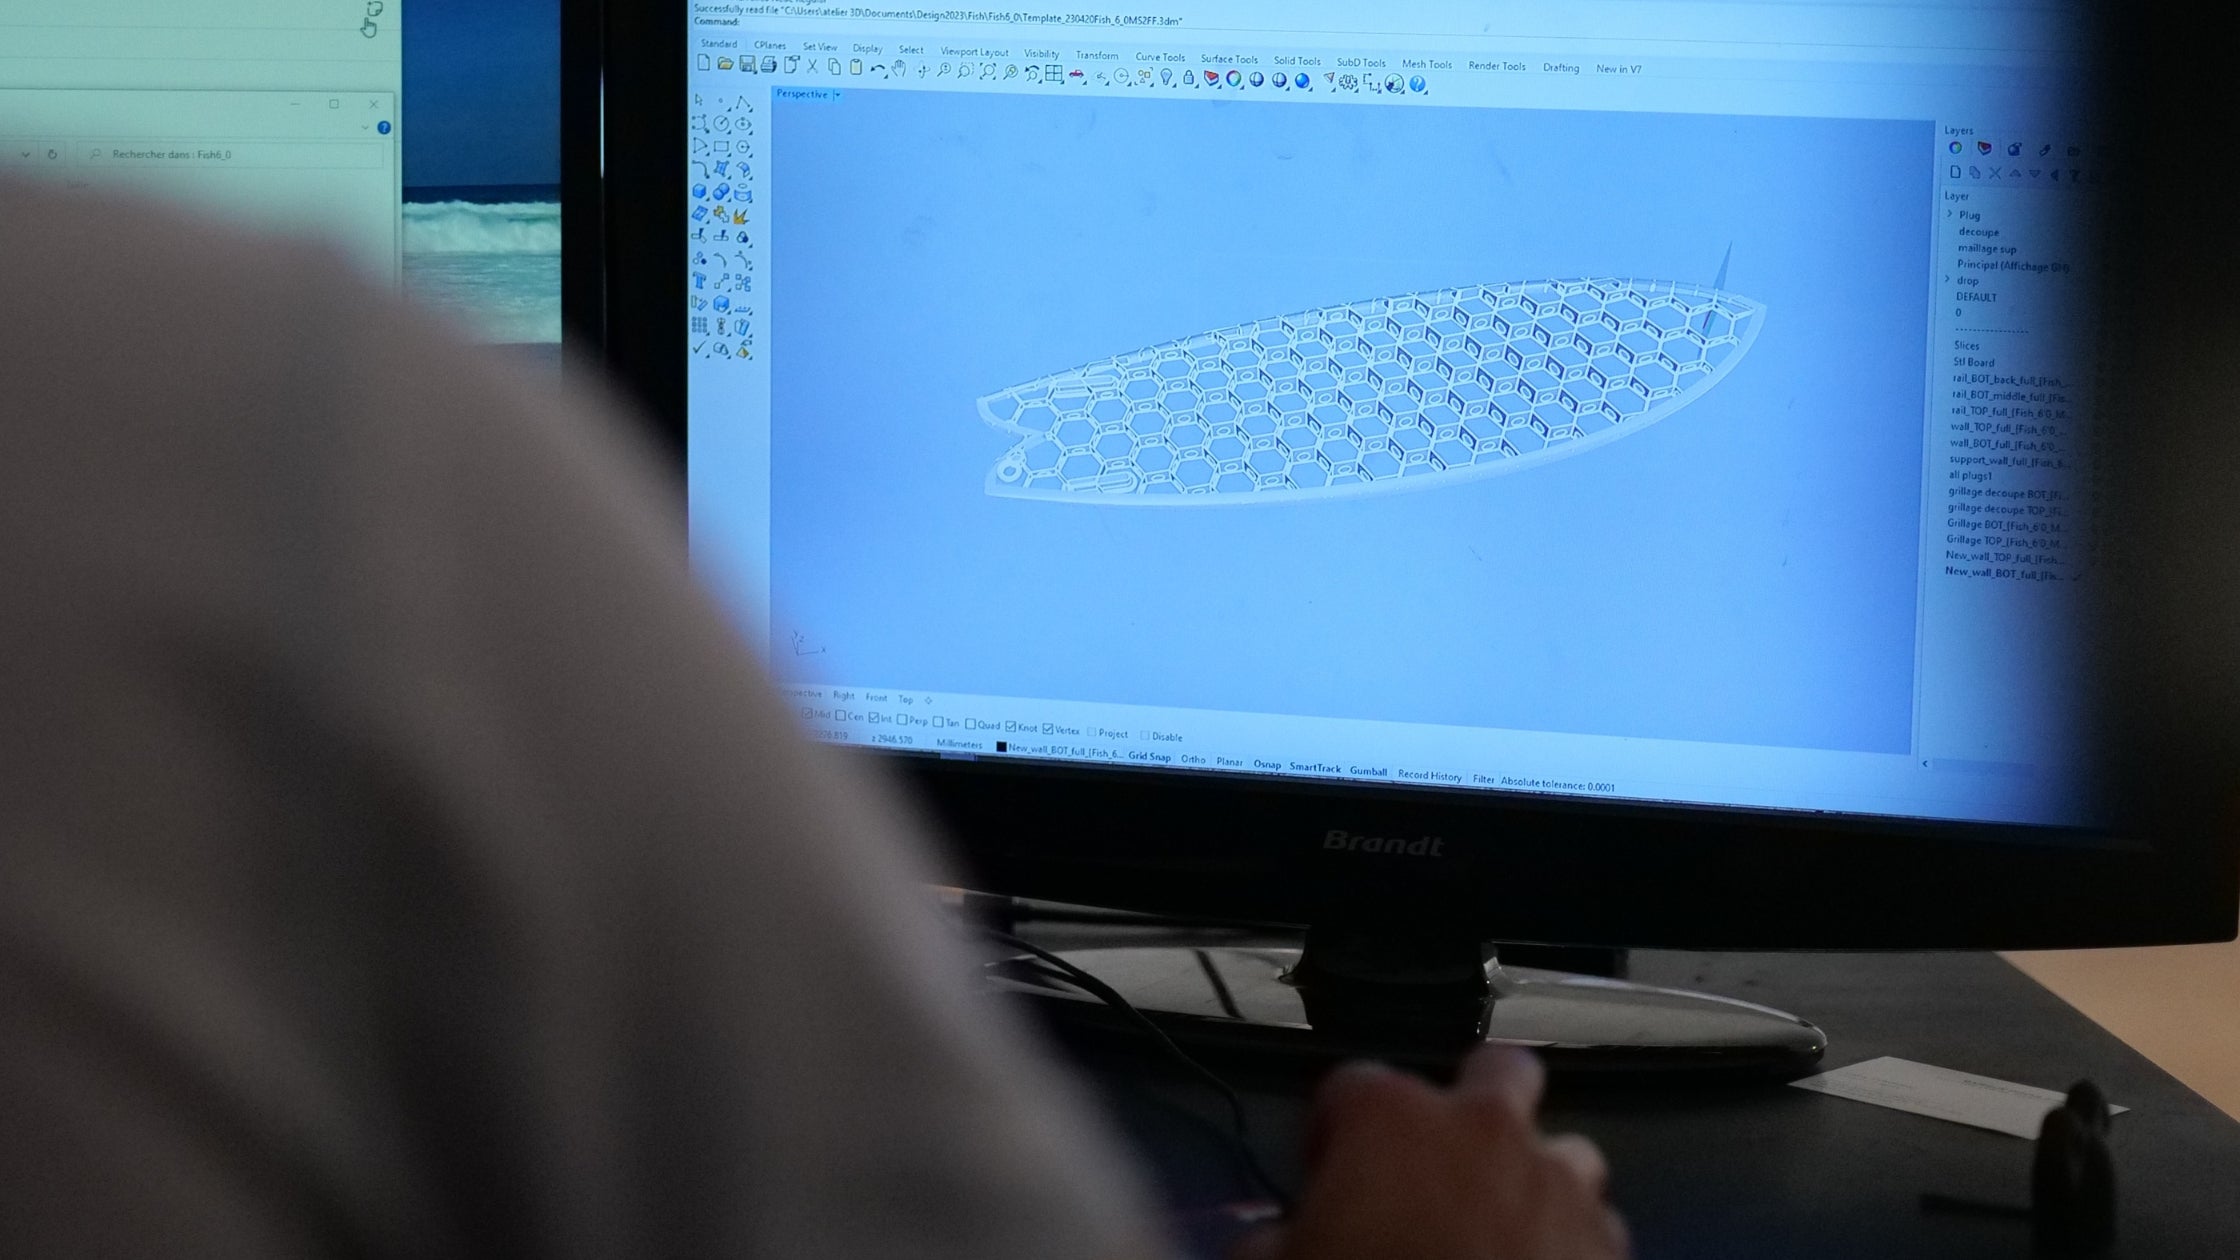 Surfboard shape in 3D on a computer screen using a CAD software 